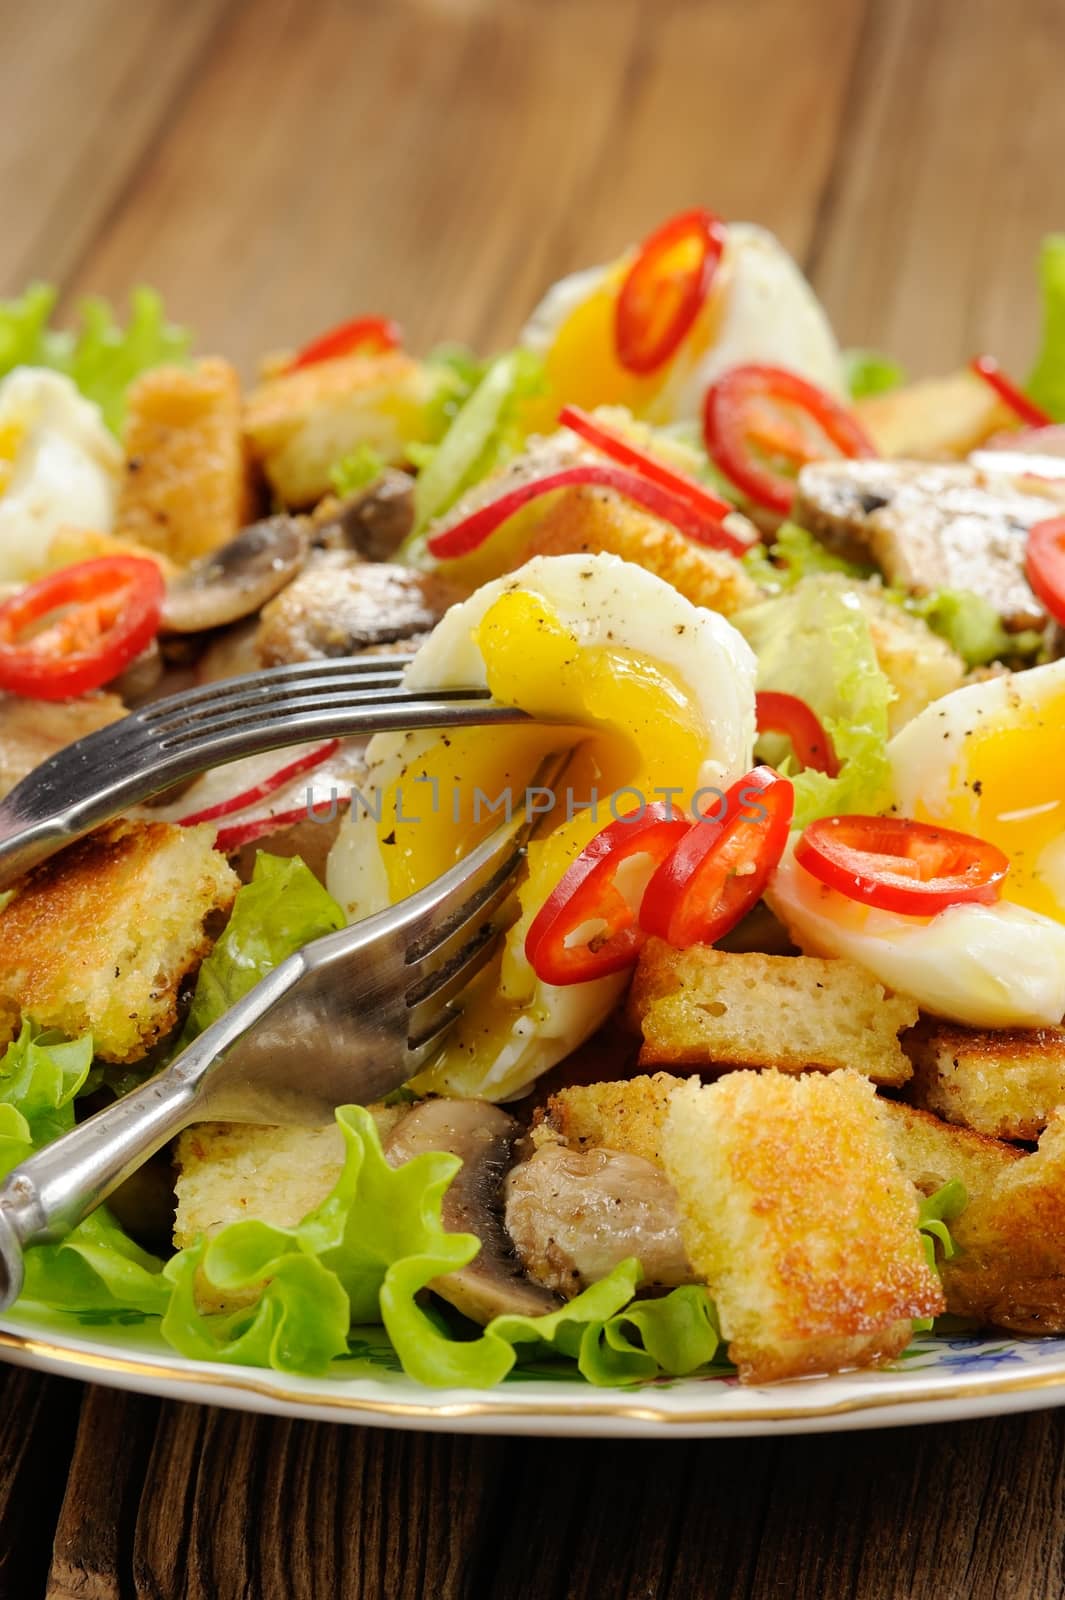 Salad Caesar with mushrooms, eggs, chili and radish with two for by Borodin